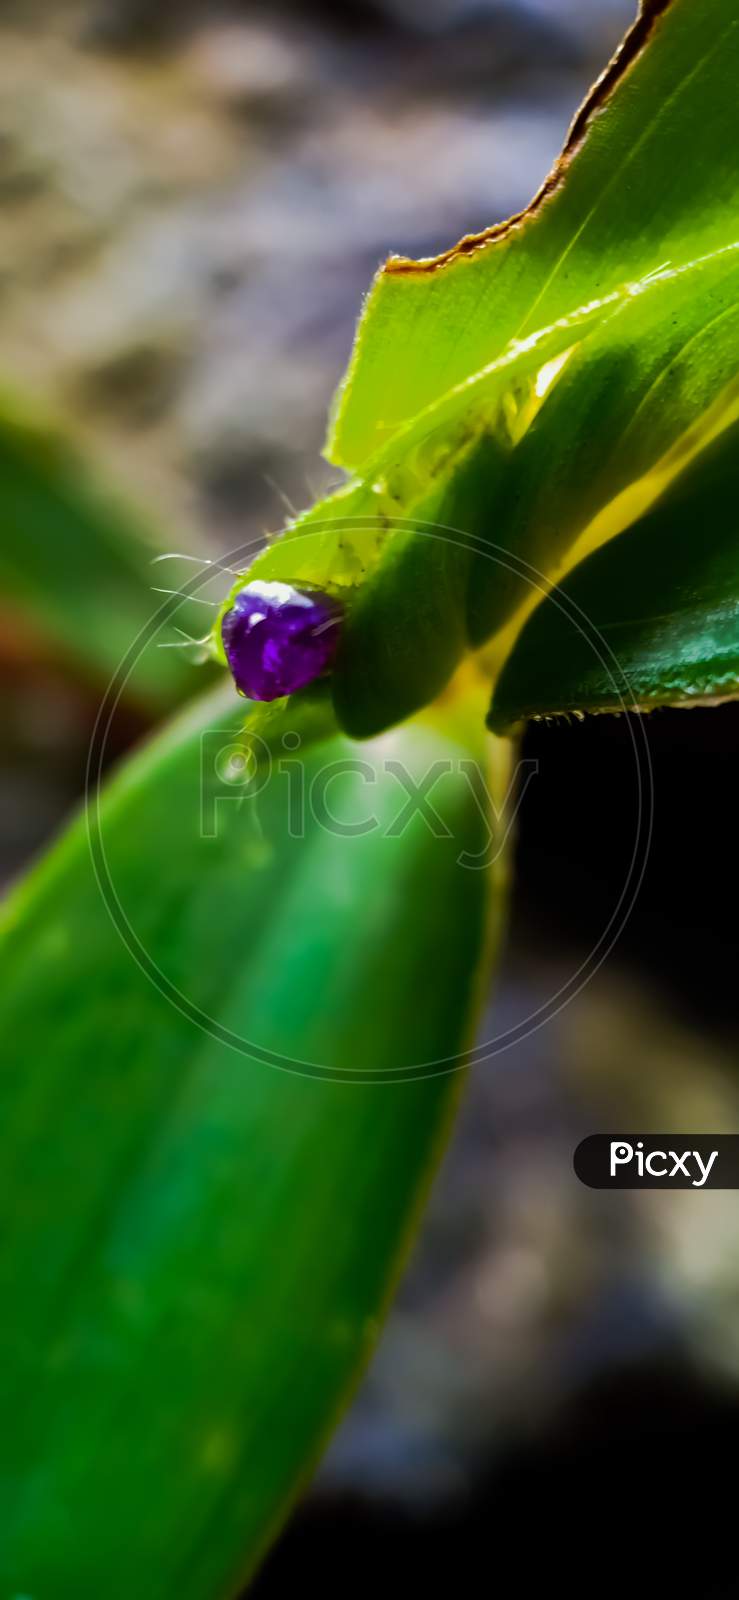 Green Plant And Violet Flower Bud